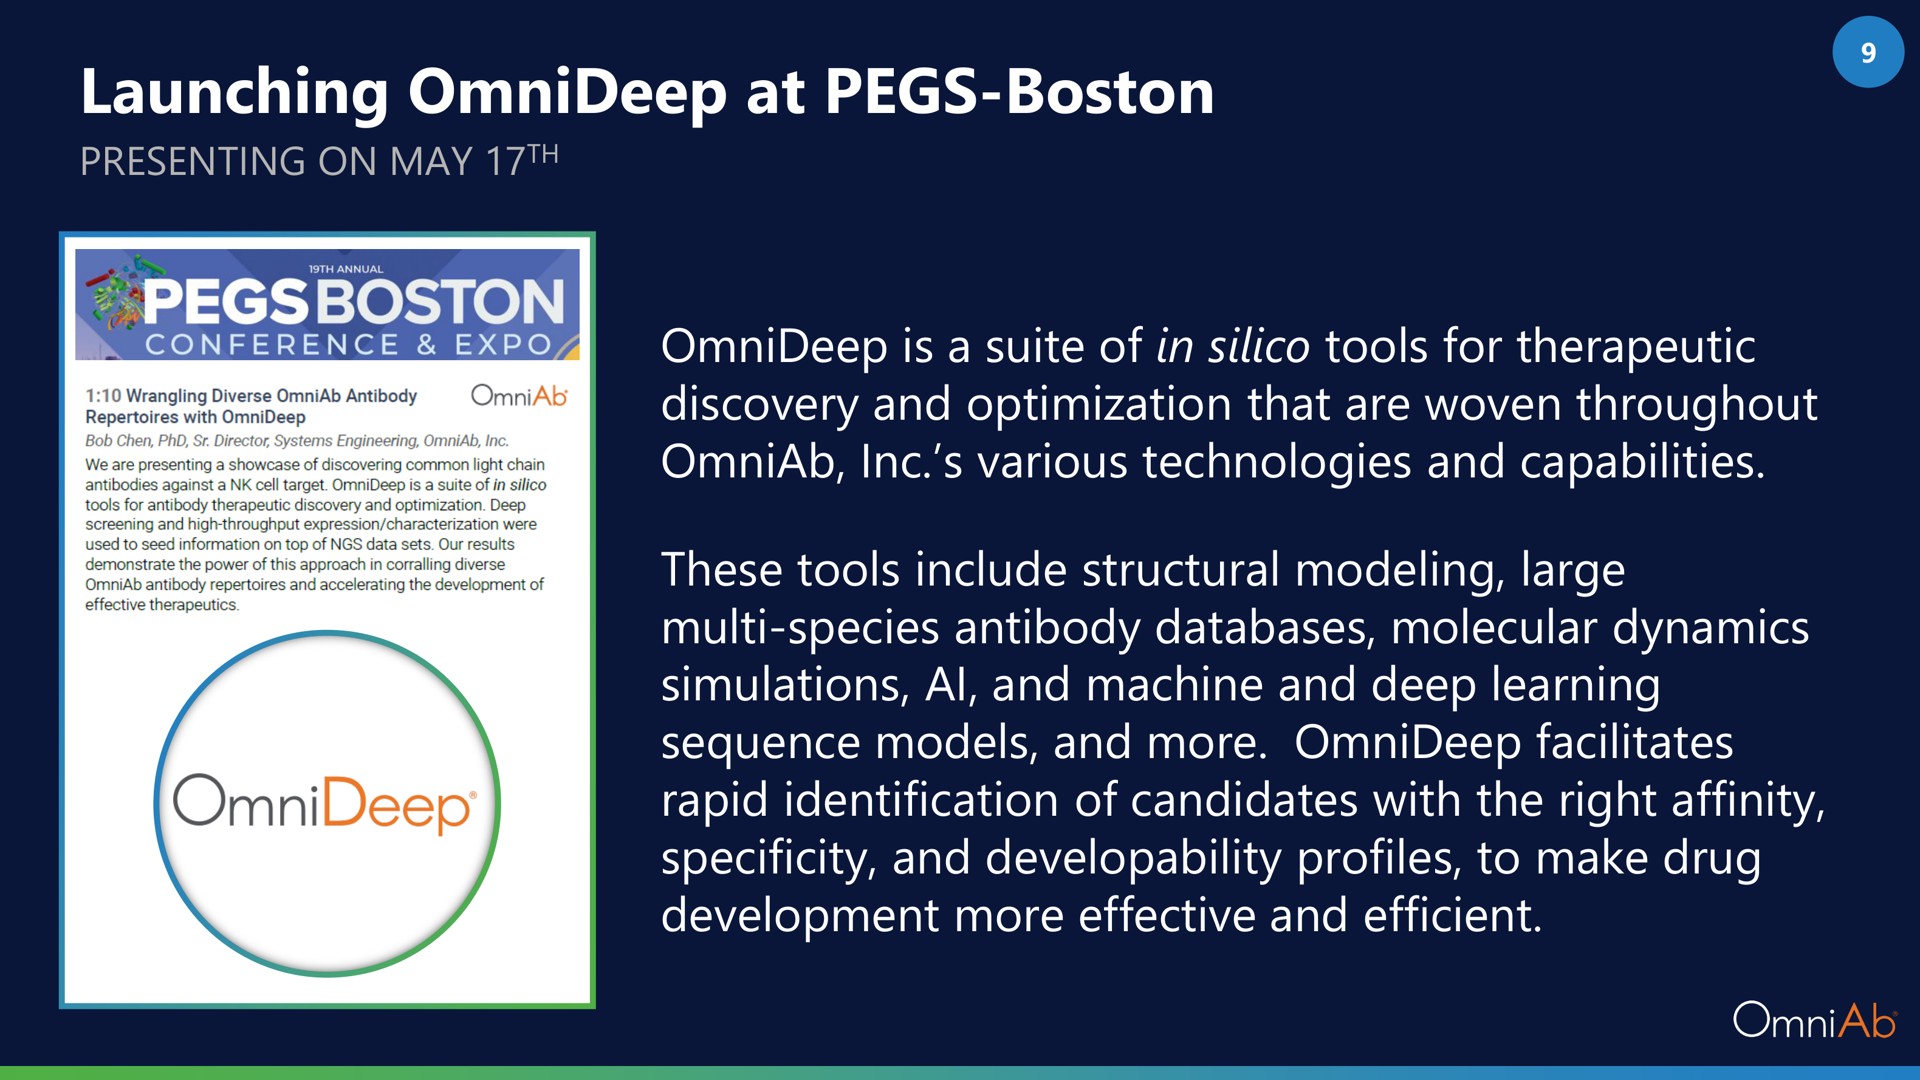 launching at pegs boston is a suite of in silico tools for therapeutic discovery and optimization that are woven throughout various technologies and capabilities these tools include structural modeling large species antibody molecular dynamics simulations and machine and deep learning sequence models and more facilitates rapid identification of candidates with the right affinity specificity and developability profiles to make drug development more effective and efficient be conference ketosis | OmniAb